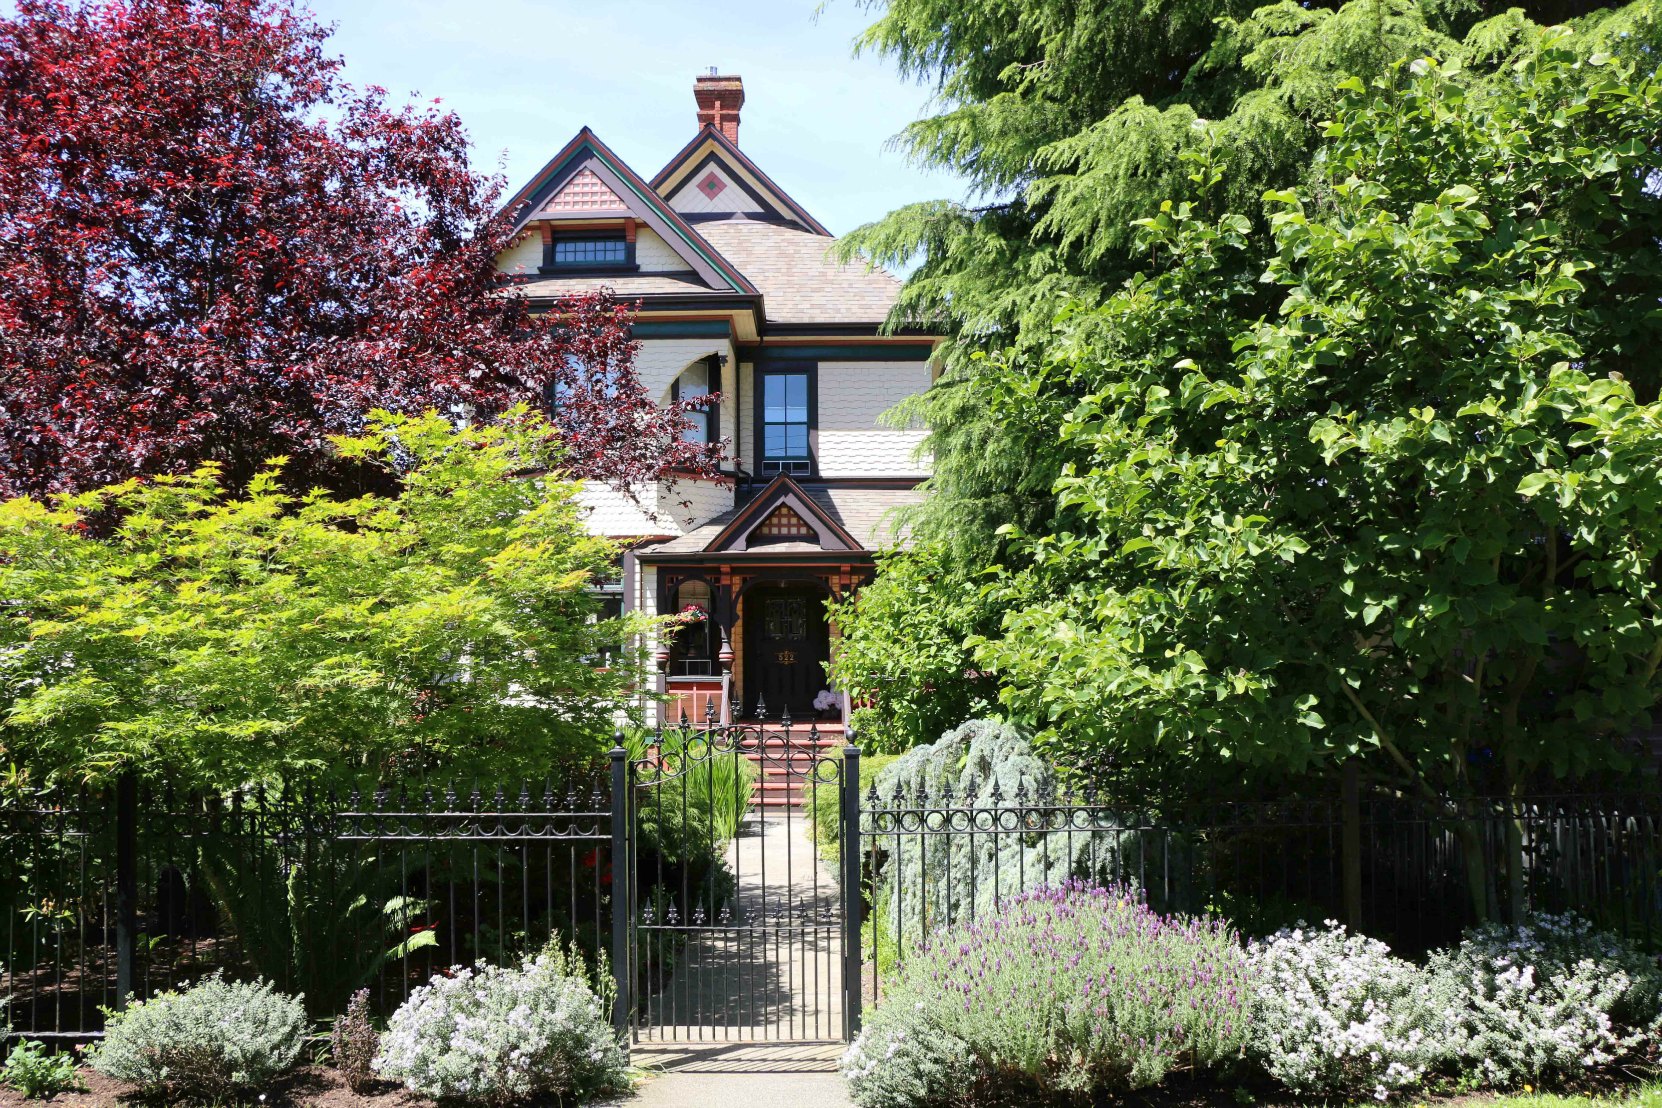 522 Quadra Street (photo by Victoria Online Sightseeing Tours)